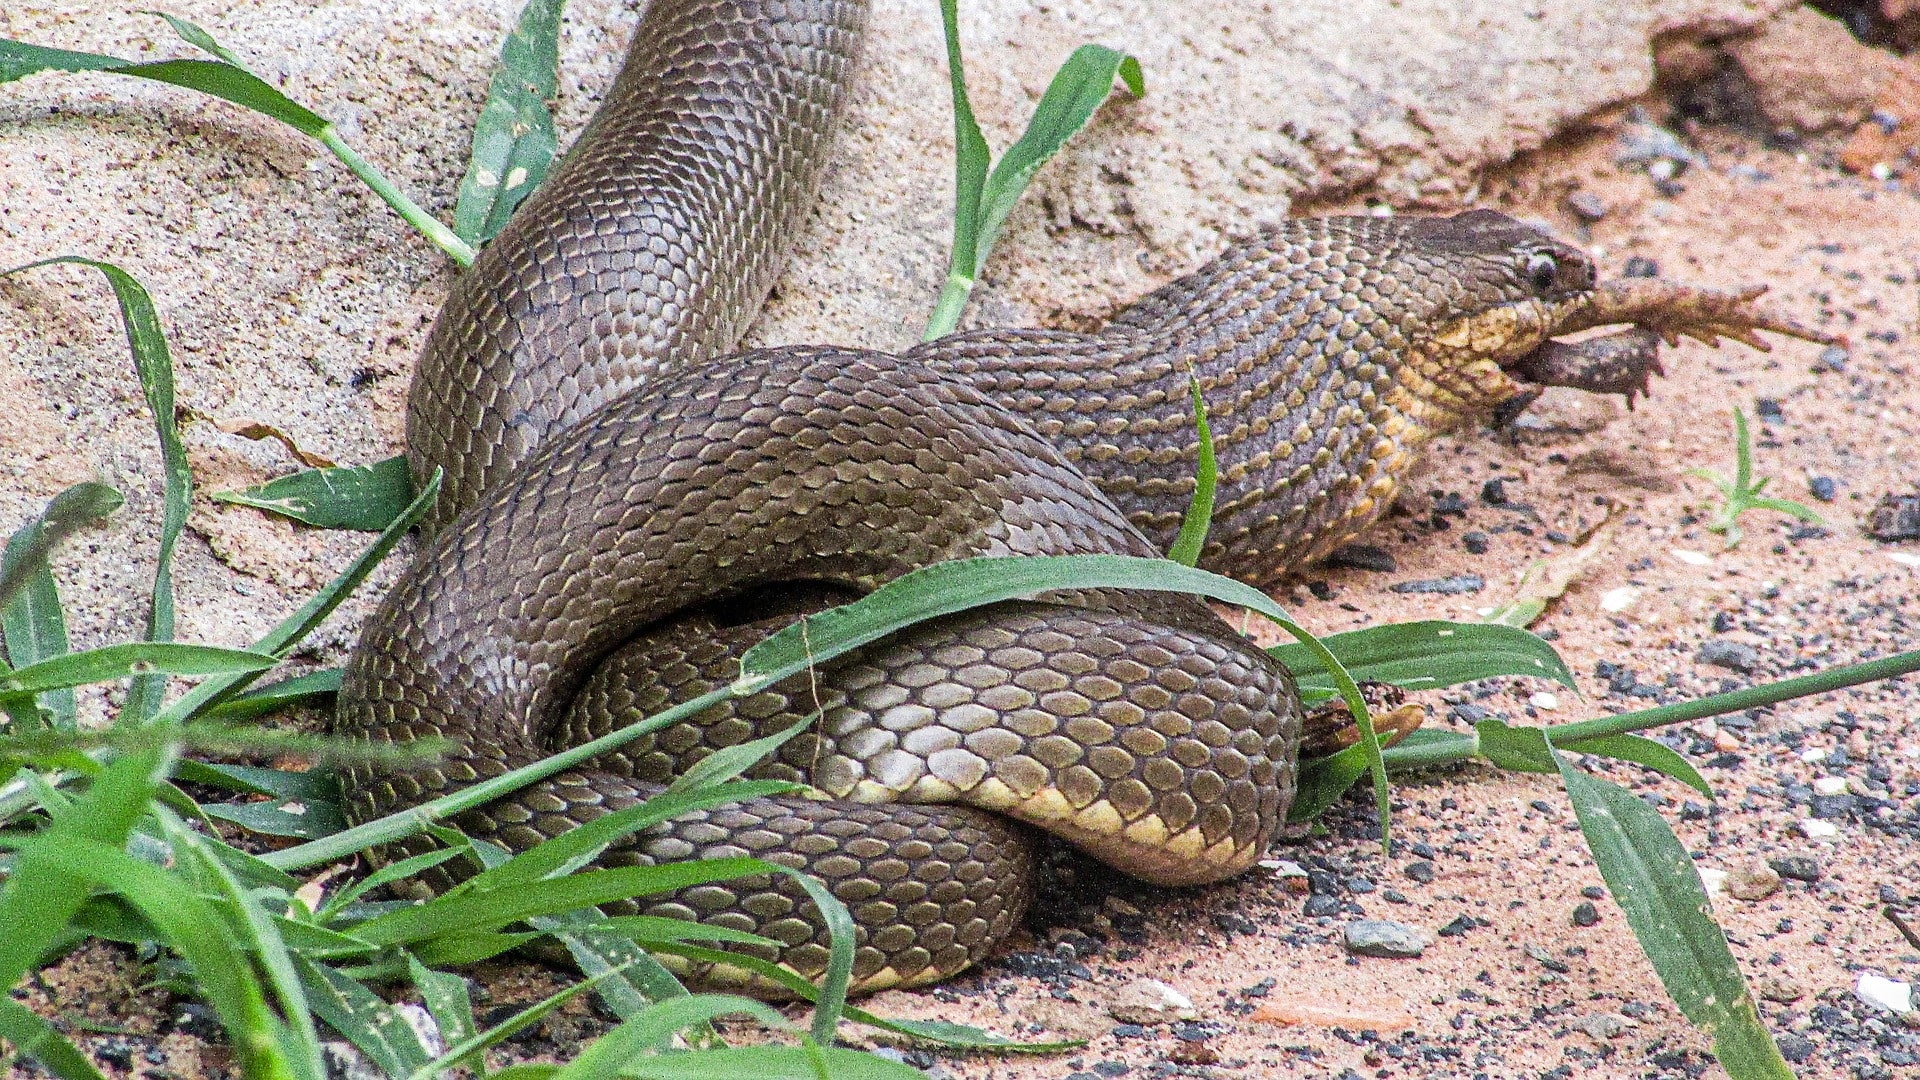 A brownish-grey snake in the middle of eating its prey.